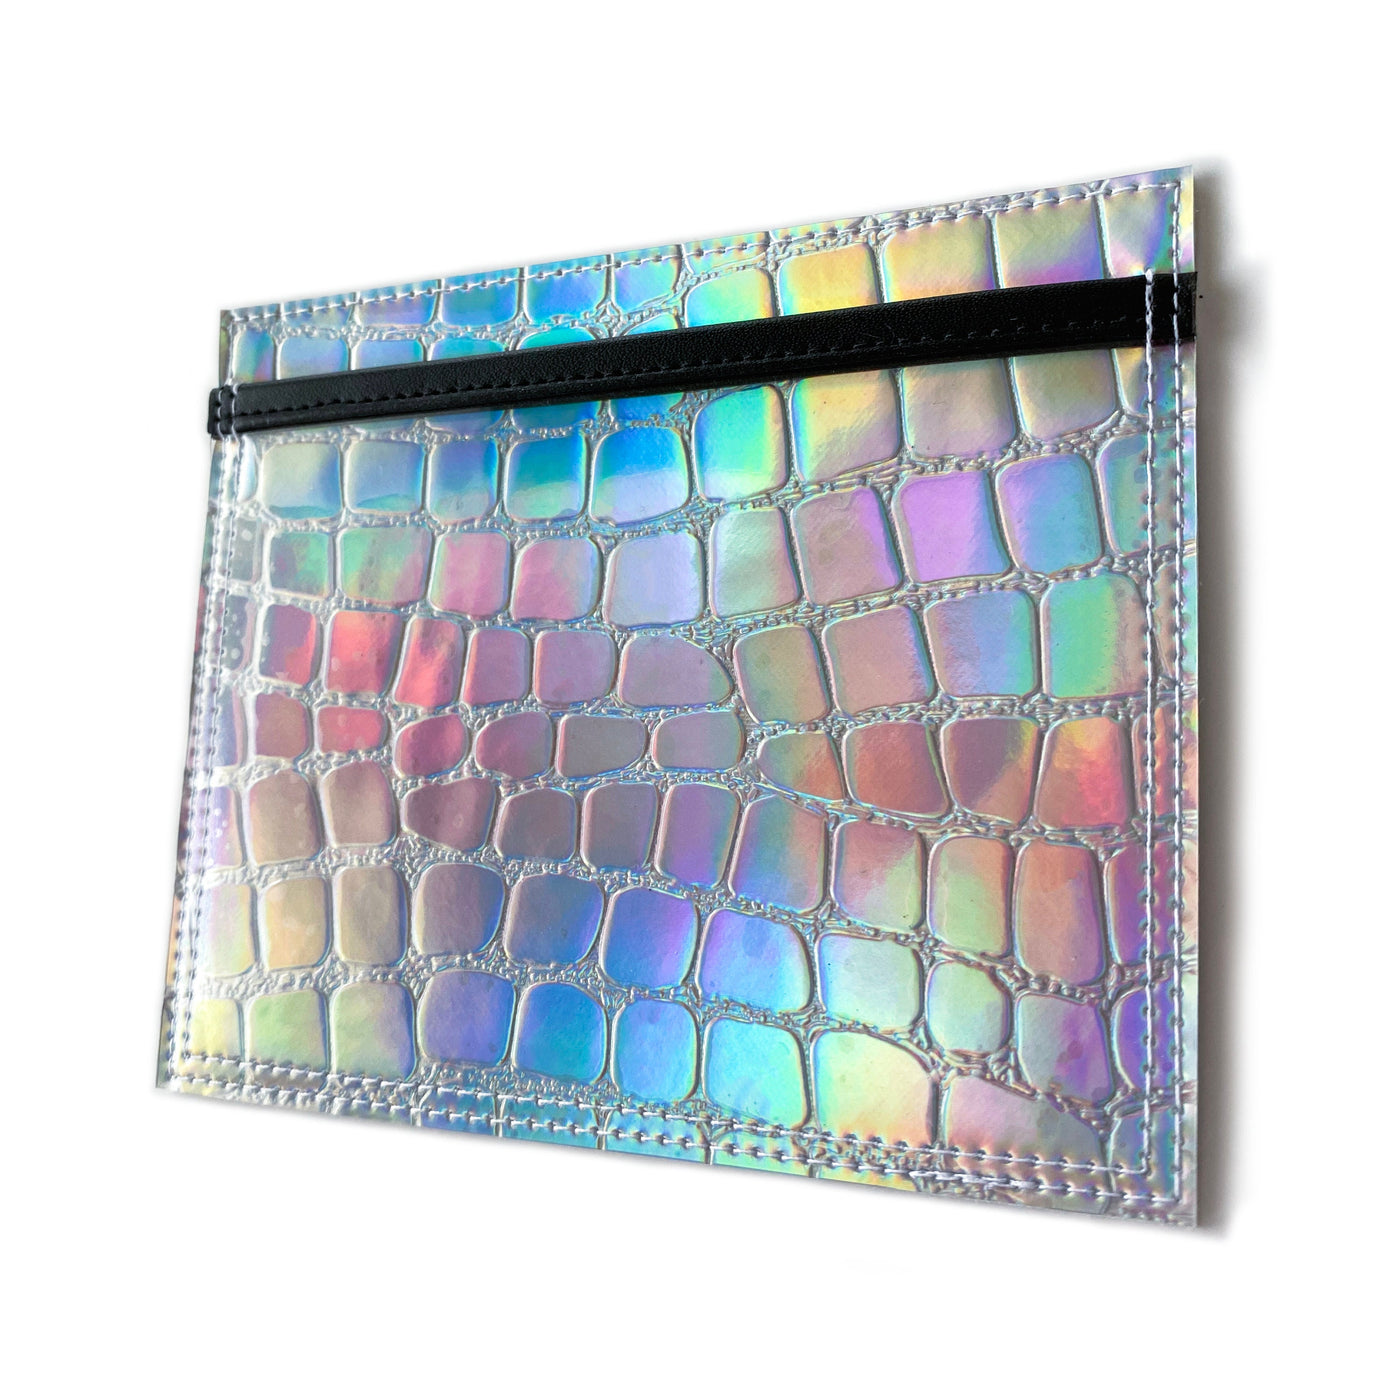 Vaccine Card Holder | silver holographic croc